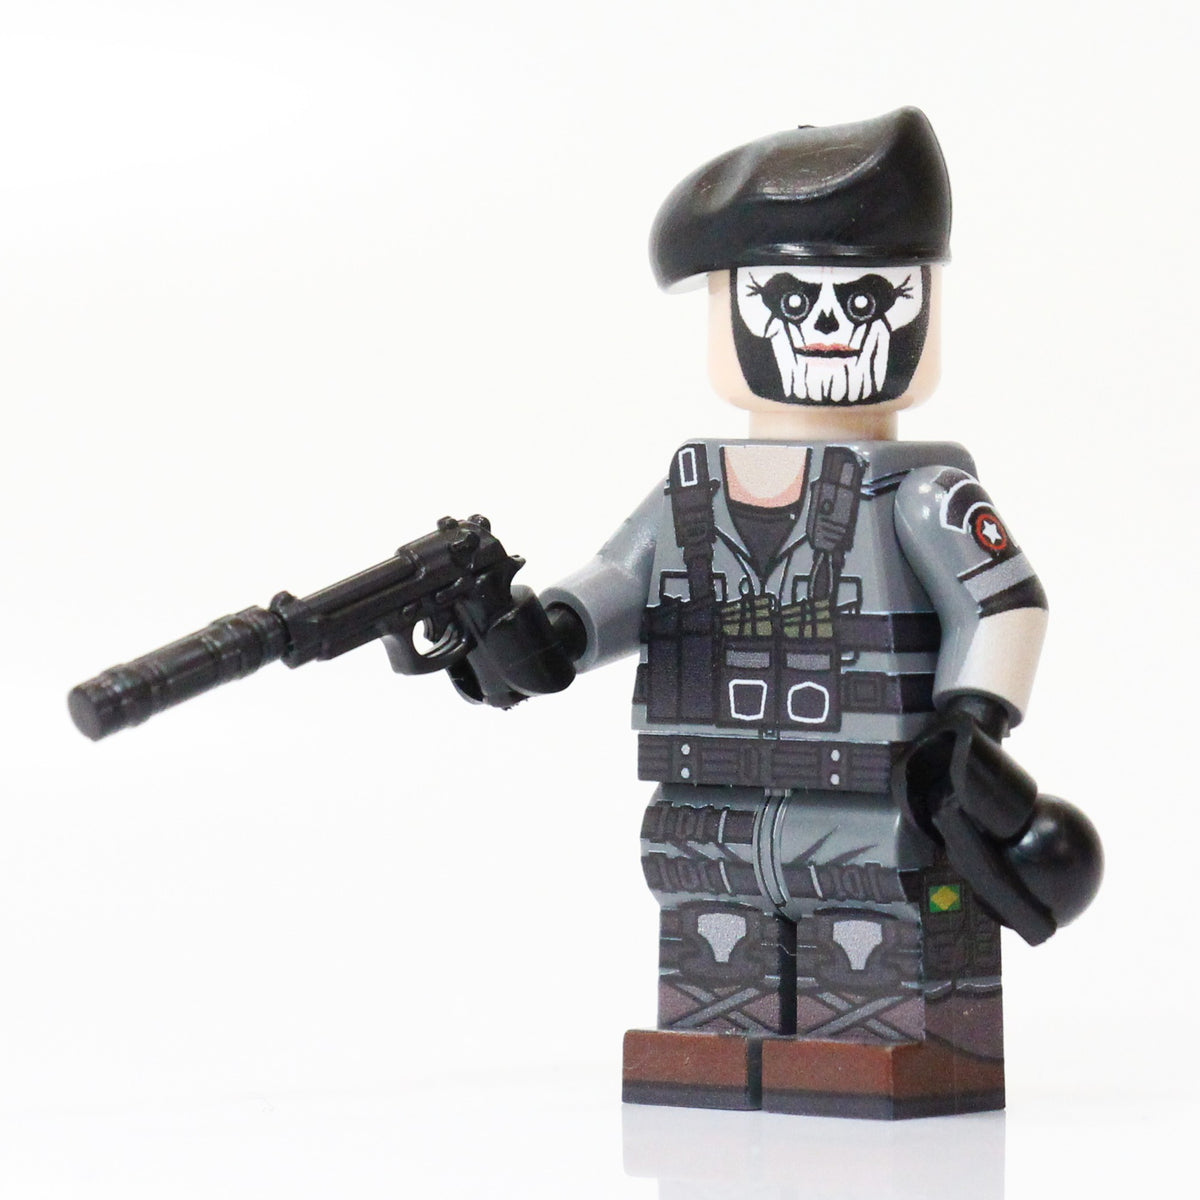 How to make LEGO UDT GHOST from Call of Duty MODERN WARFARE 2 